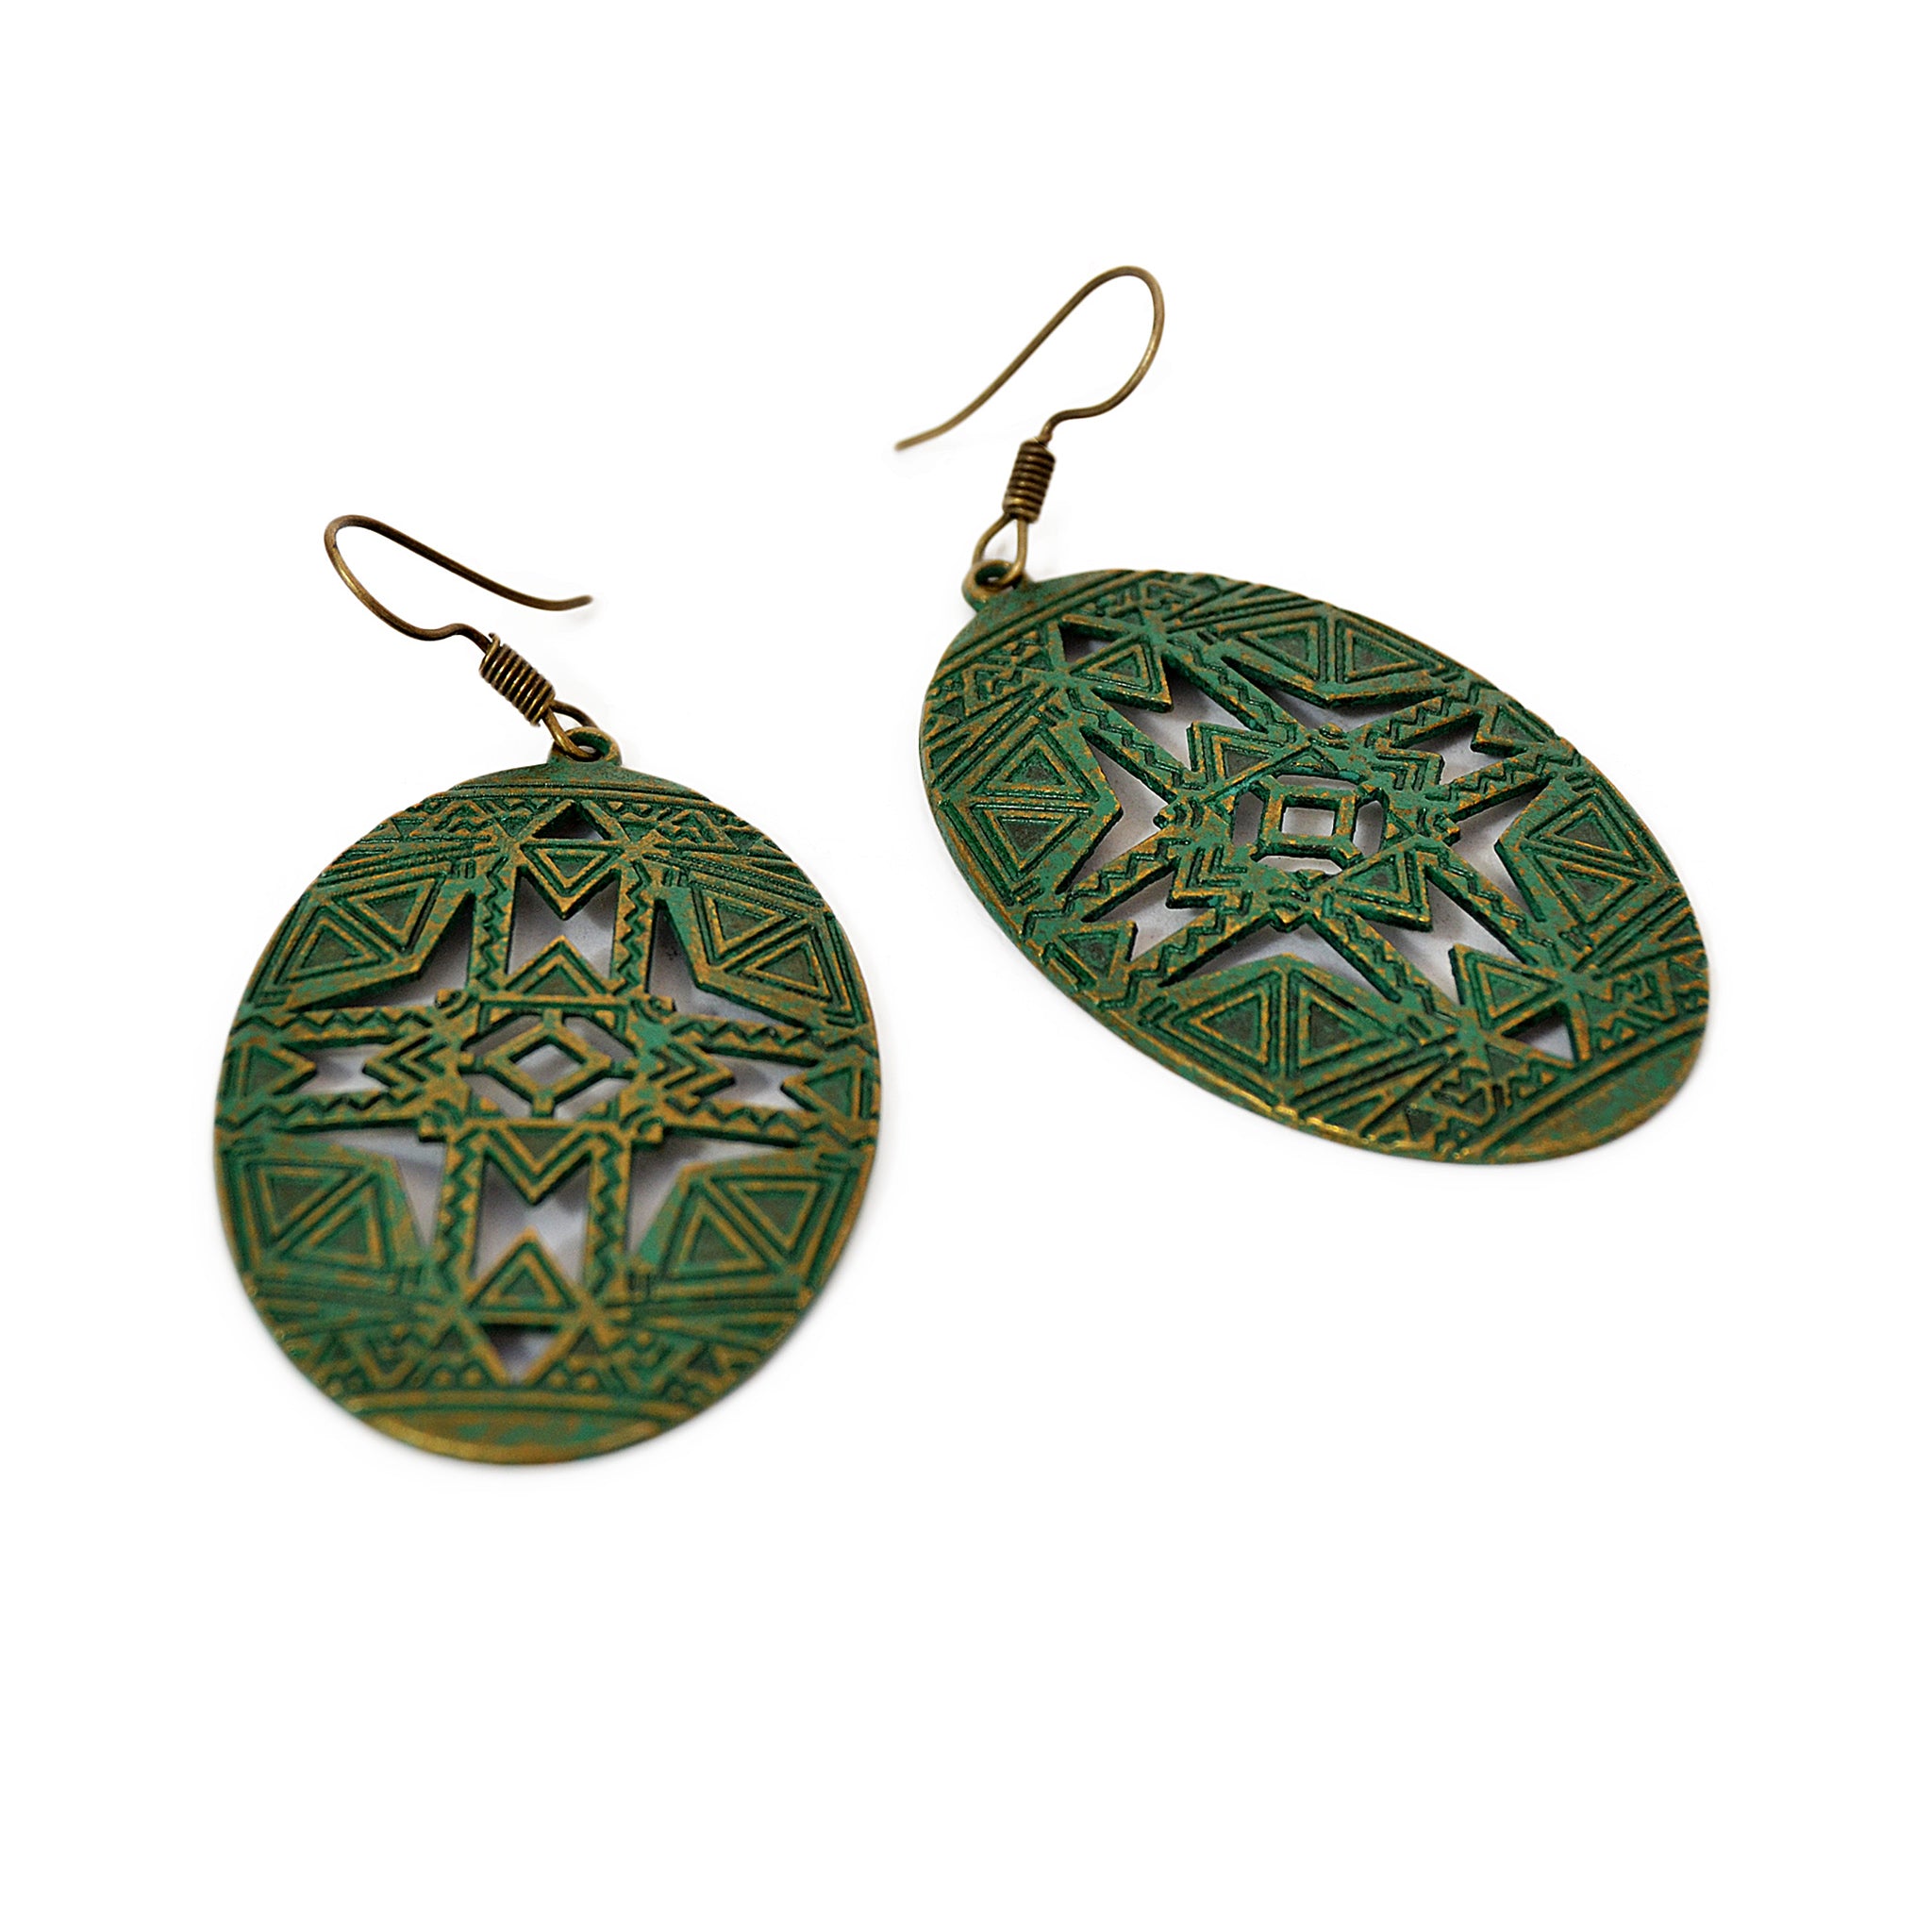 Oval hanging earrings with old turquoise green patina and geometric carved design